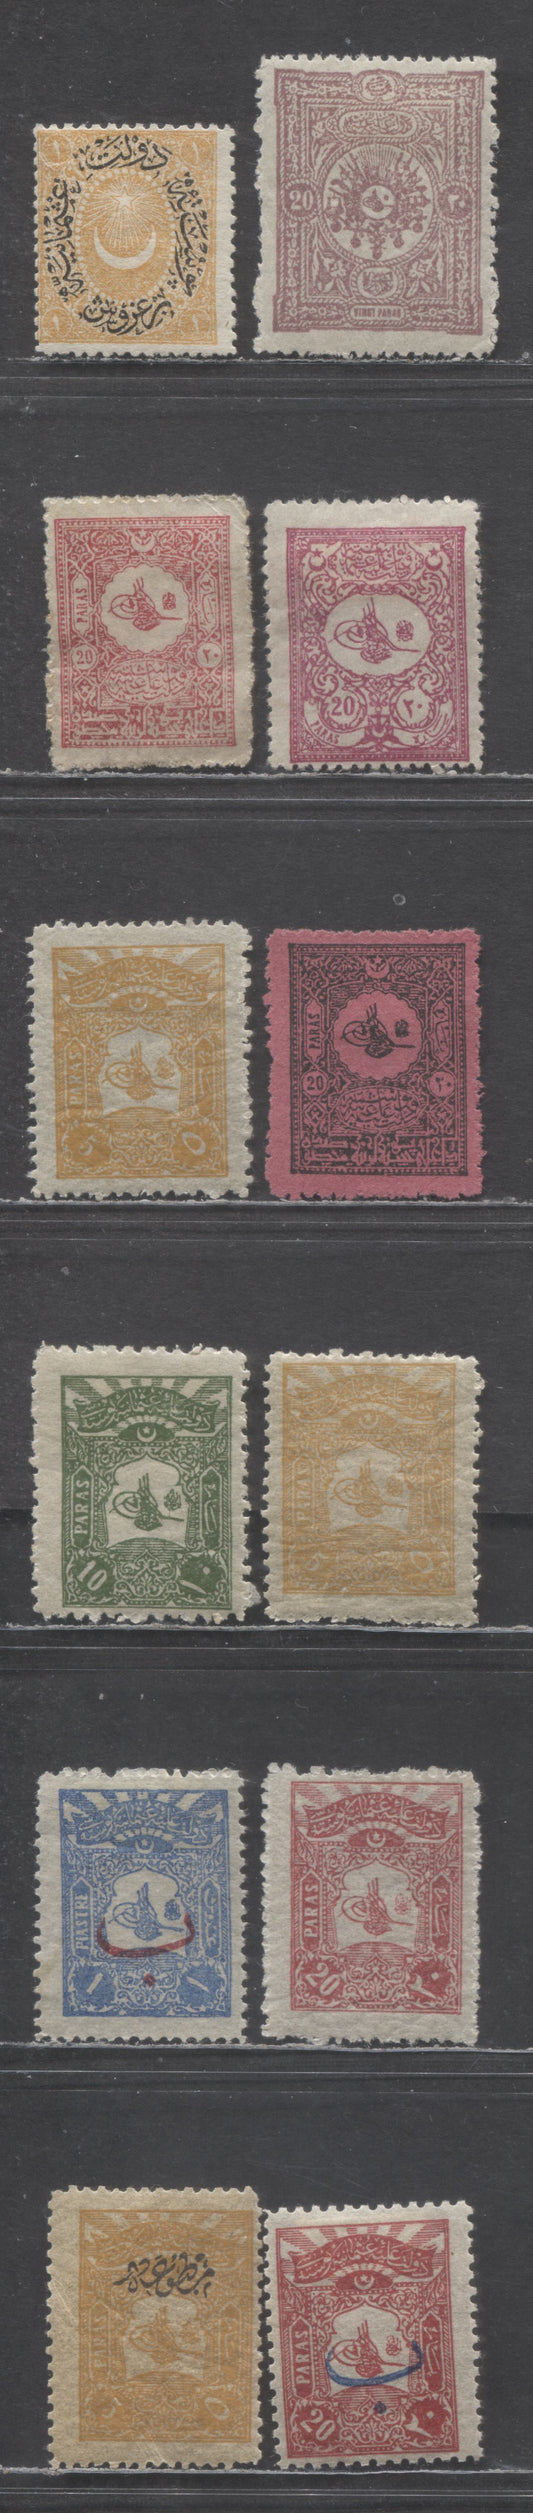 Lot 9 Turkey SC#44/P49 1876-1905 Star/Crescent, Tughra Designs & Official Overprints, A few with no gum. J44, 129-130. Two different perfs of 5pa ochre, 12 F/VFOG & Unused Singles, Click on Listing to See ALL Pictures, Estimated Value $15